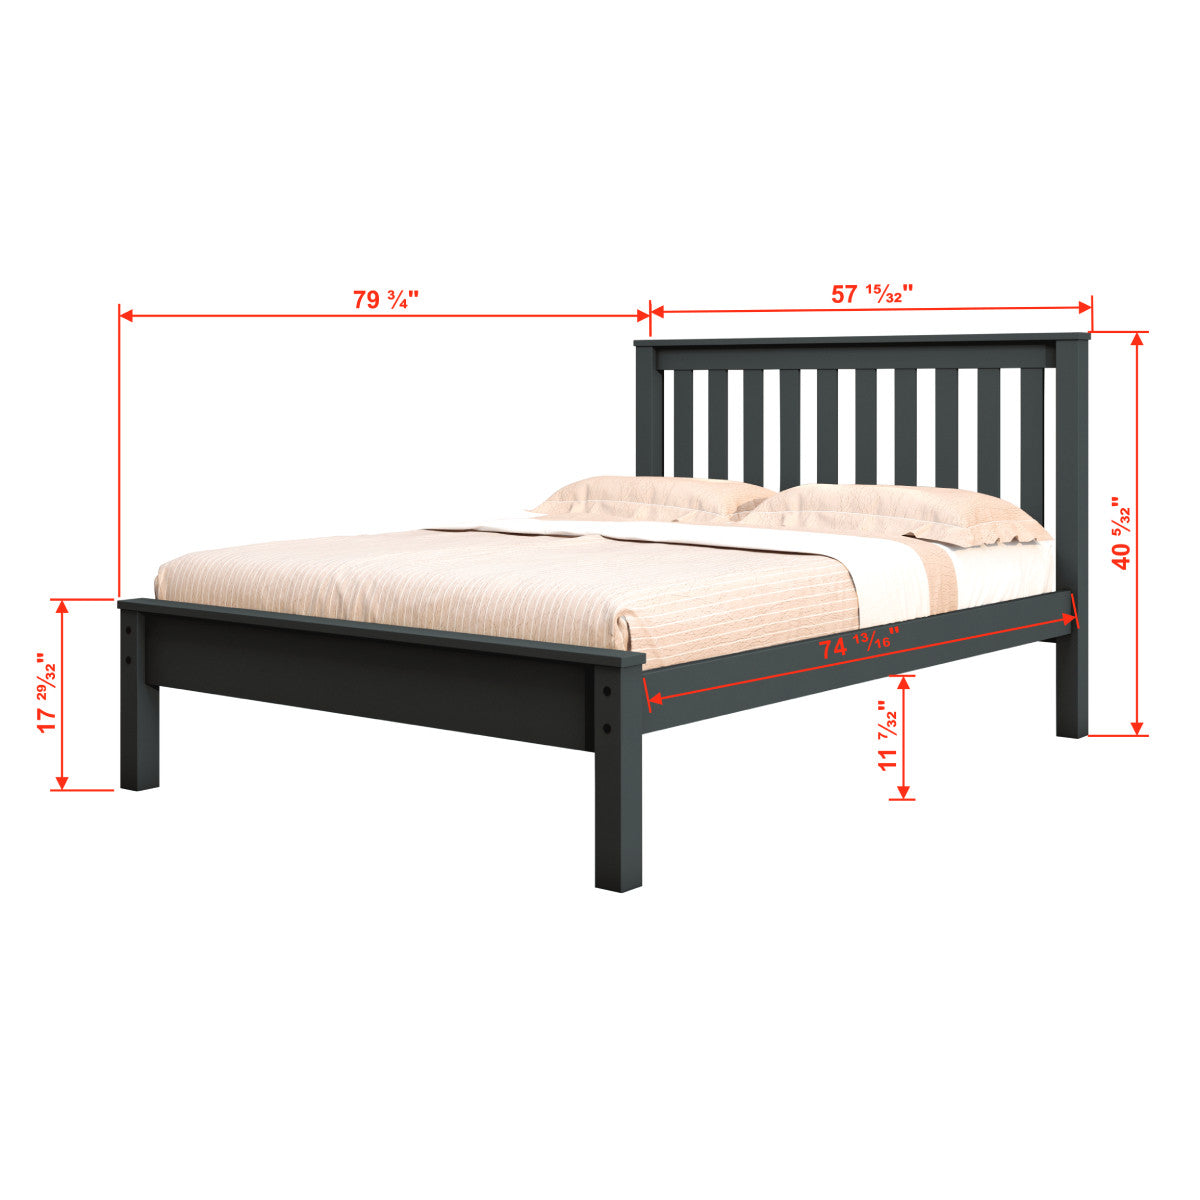 FULL CONTEMPO BED WITH TRUNDLE BED IN DARK GREY FINISH